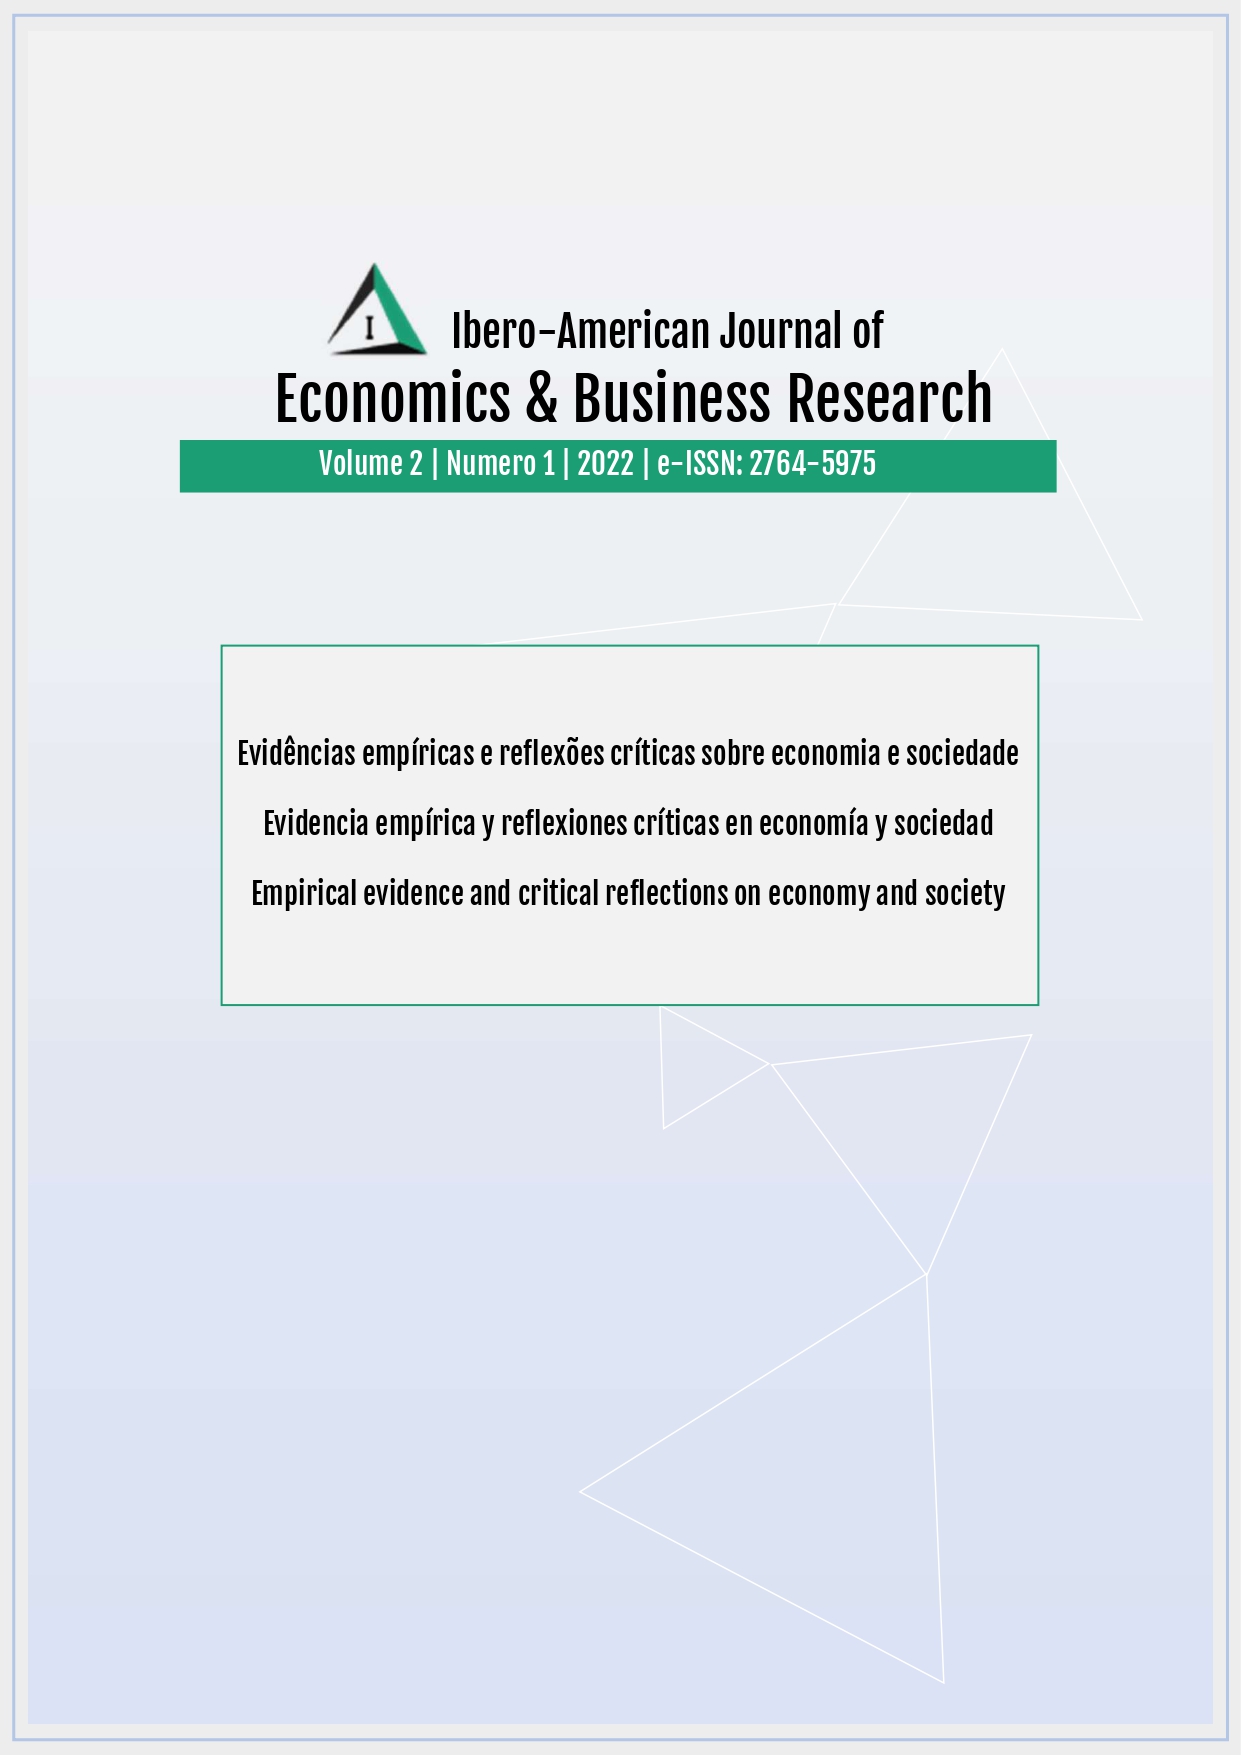 					View Vol. 2 No. 1 (2022): Empirical evidence and critical reflections on economy and society
				